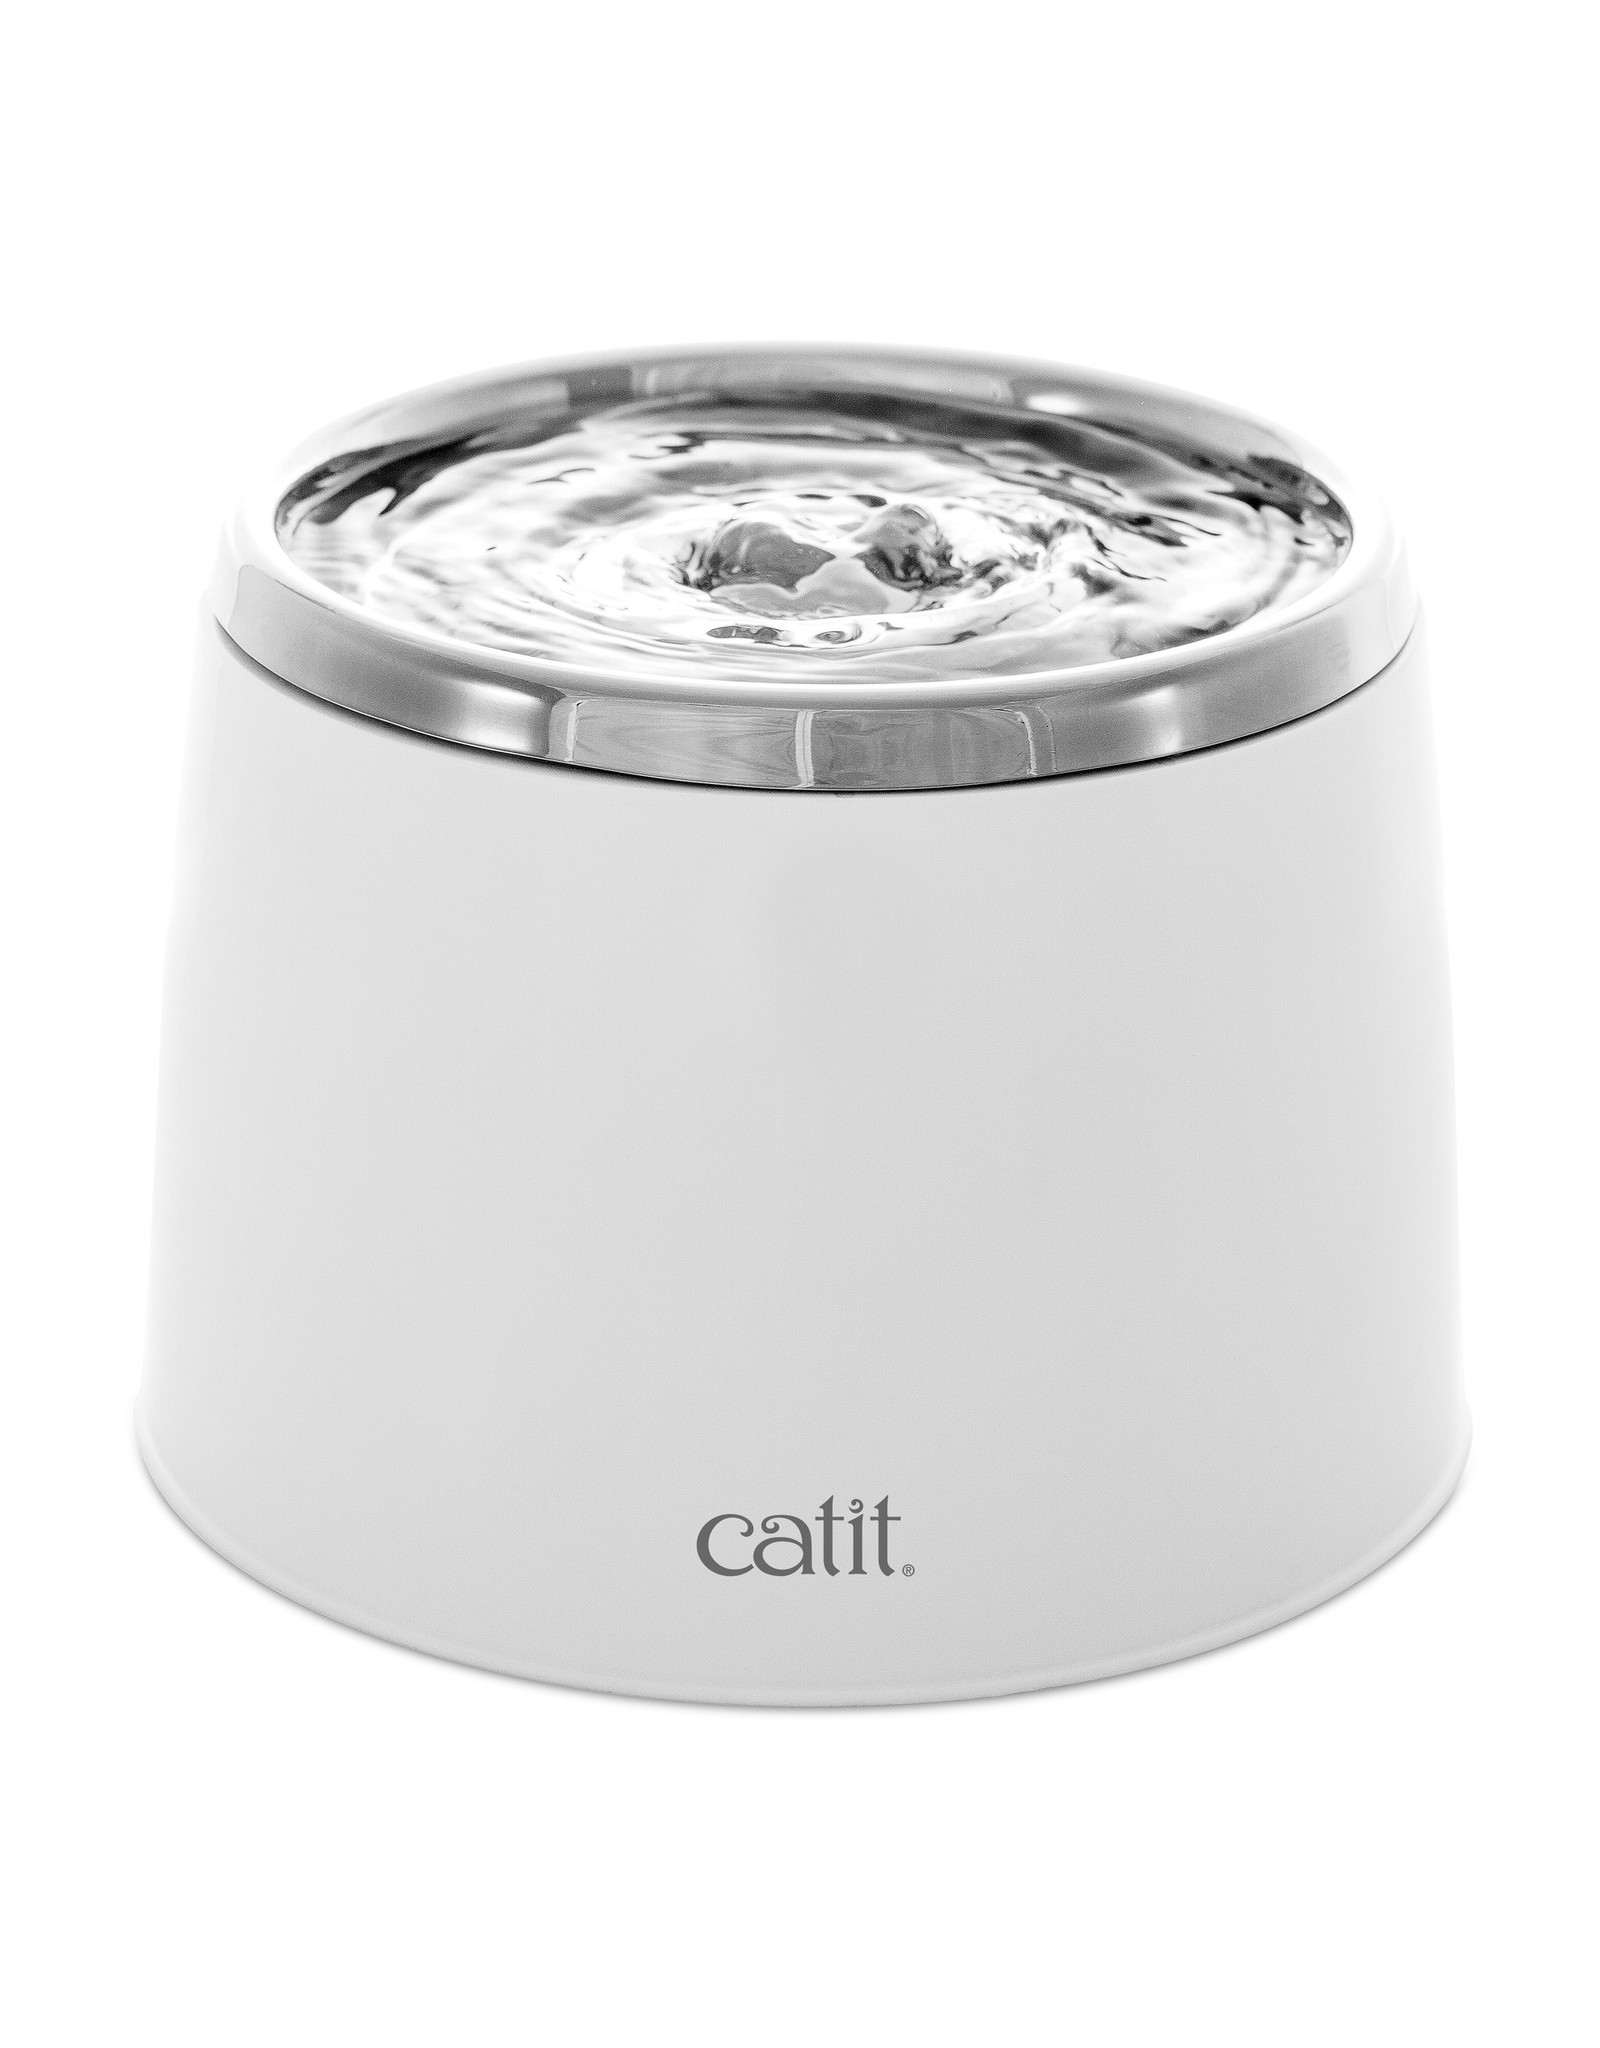 CatIt Stainless Steel Top Drinking Fountain 2L